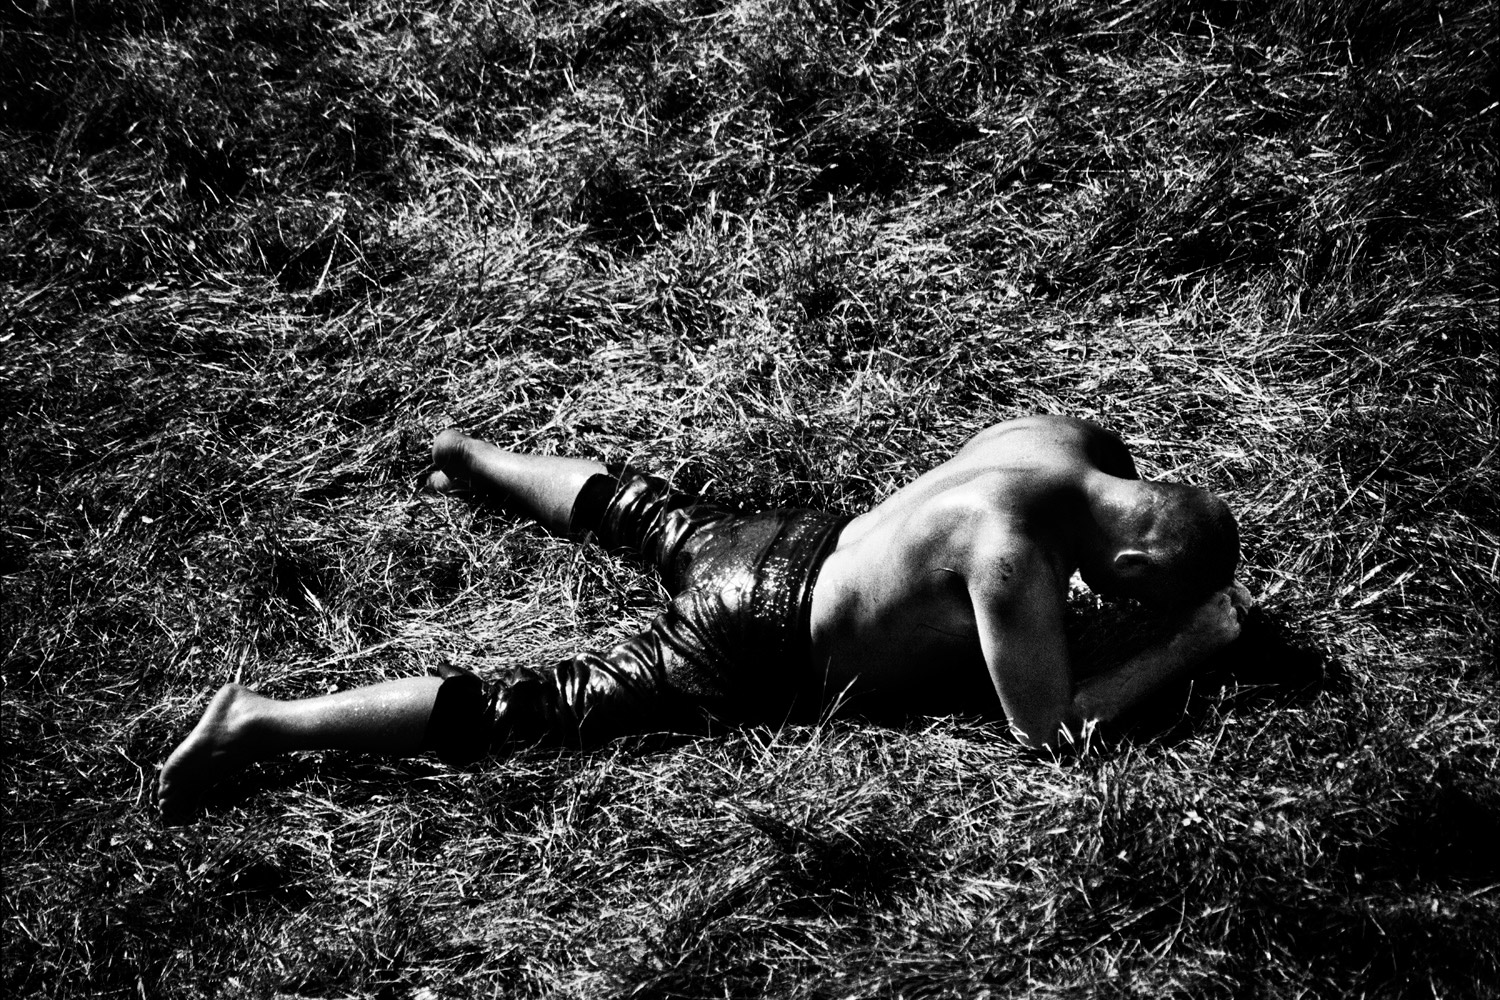 A wrestler lies defeated on the field.